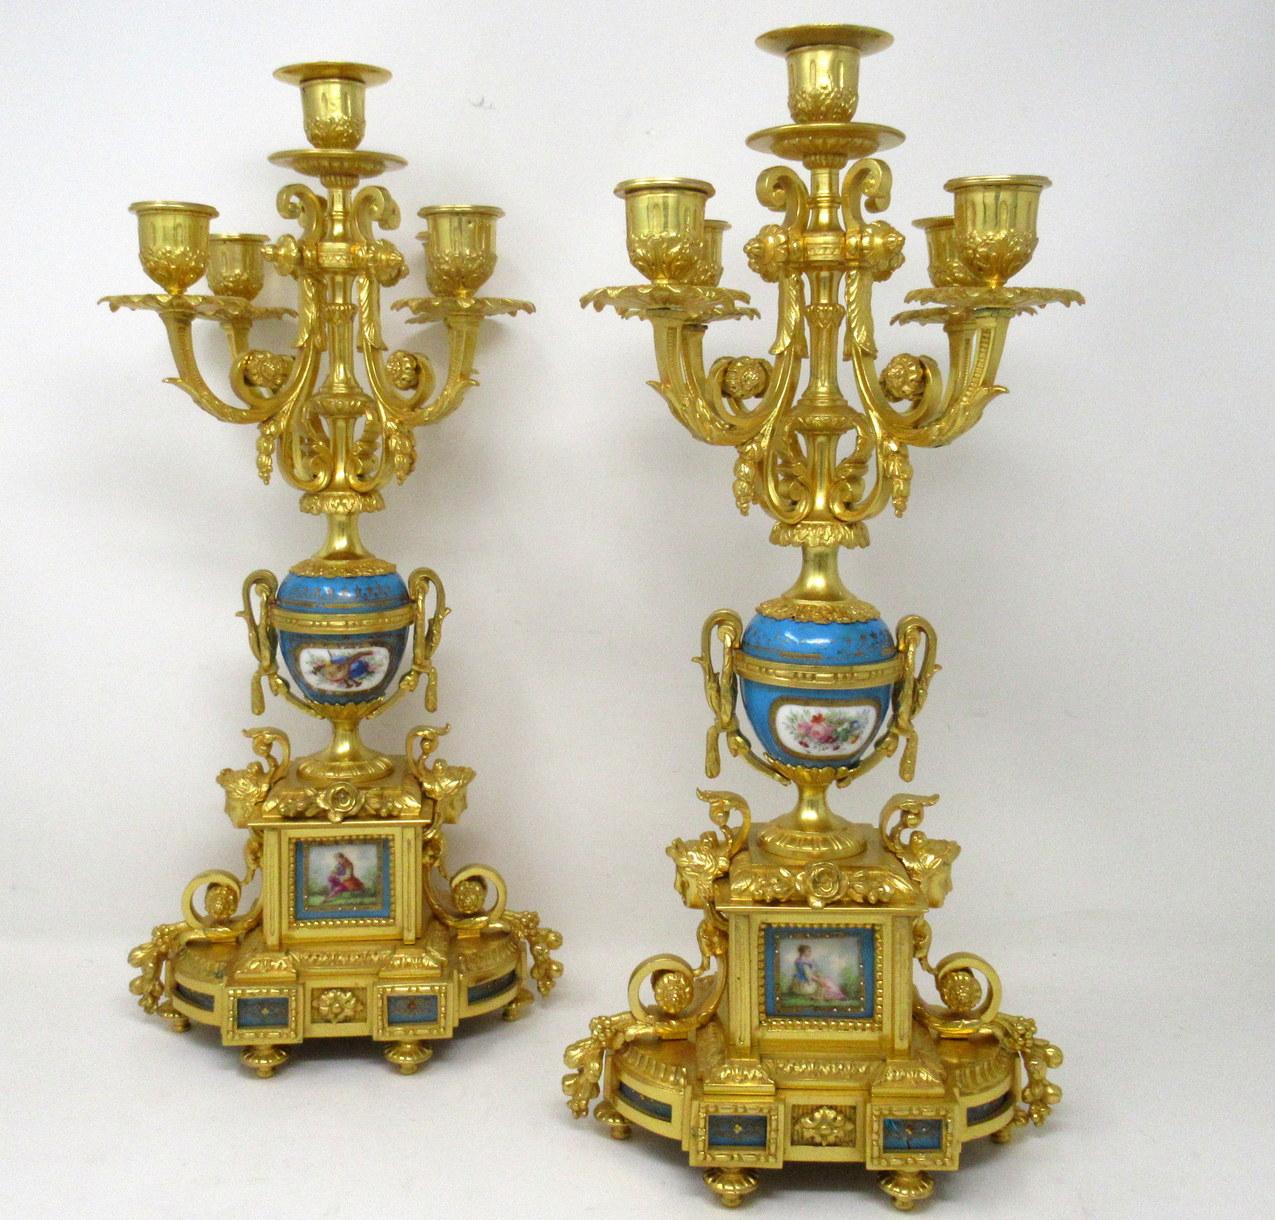 A fine stylish and imposing pair of French five light table or mantle sevres porcelain mounted Ormolu Candelabra of outstanding quality. Early to mid-nineteenth century. 

Each with four scrolling leaf capped and one central branch above a